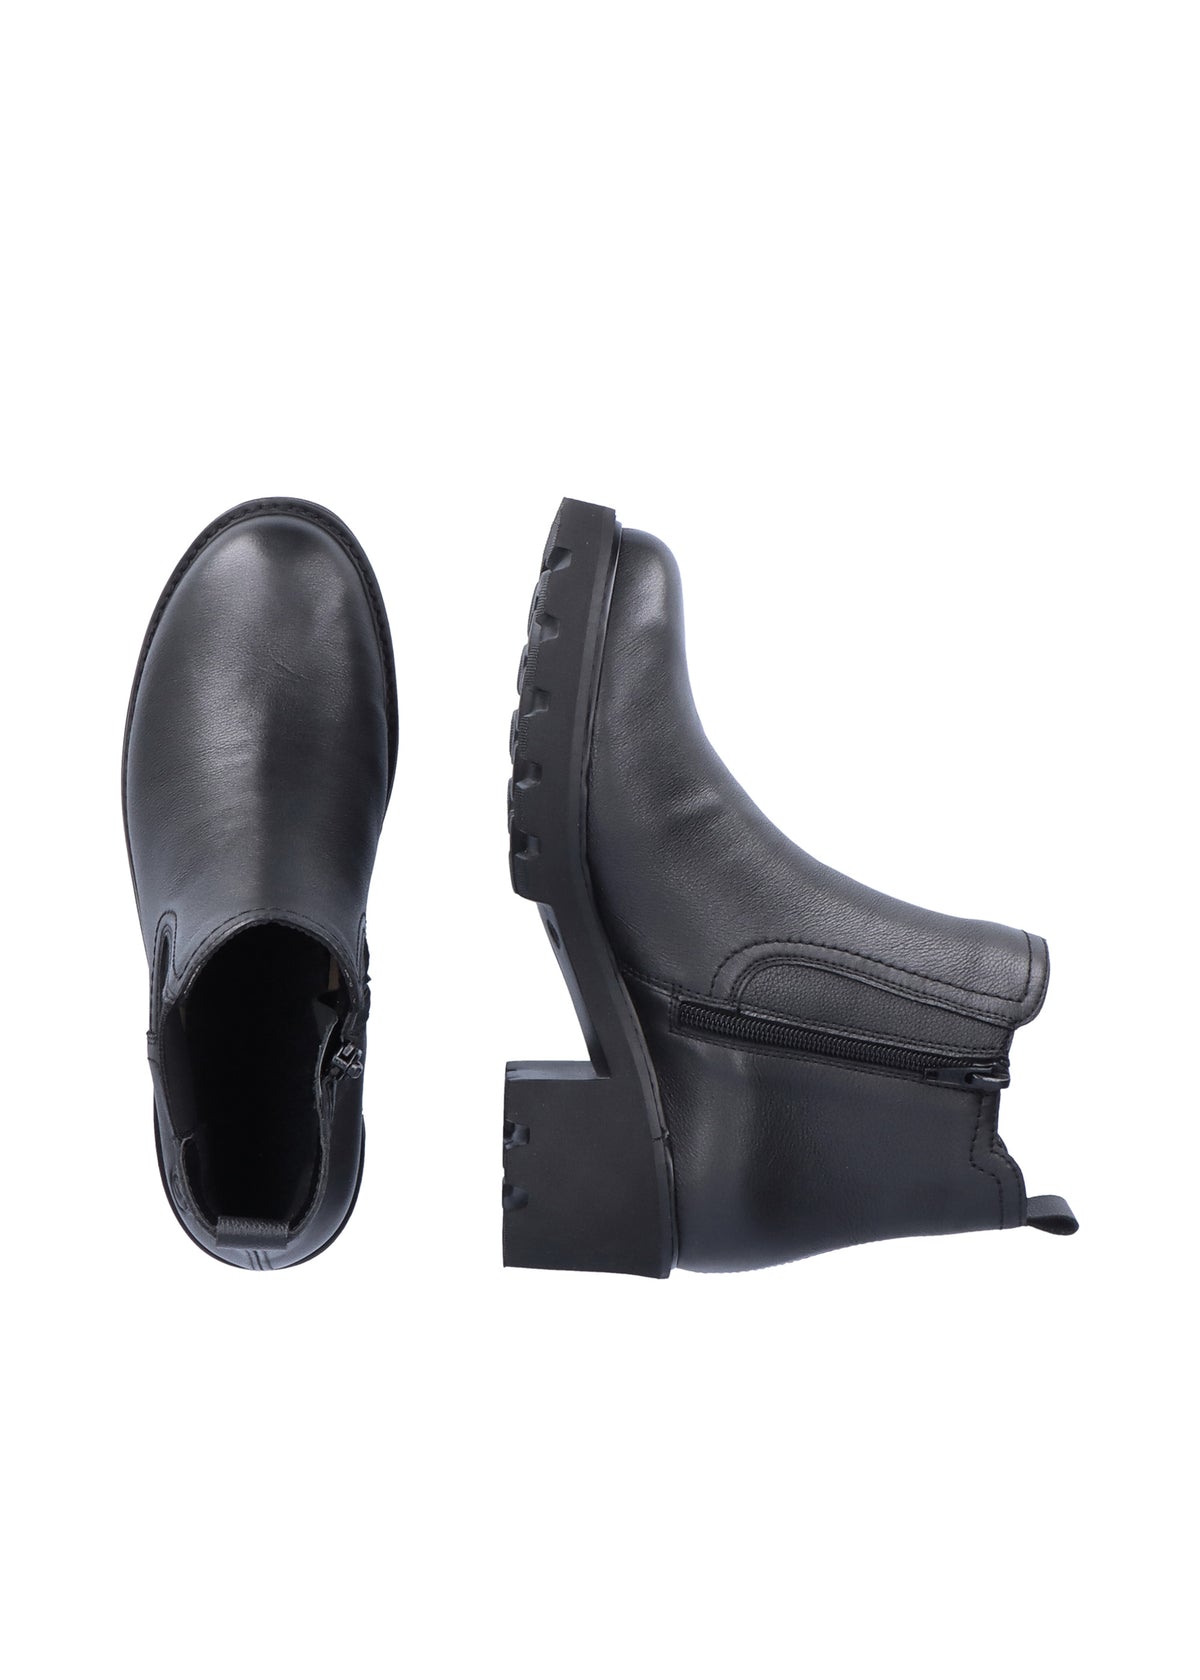 Chelsea ankle boots with a thick sole - black